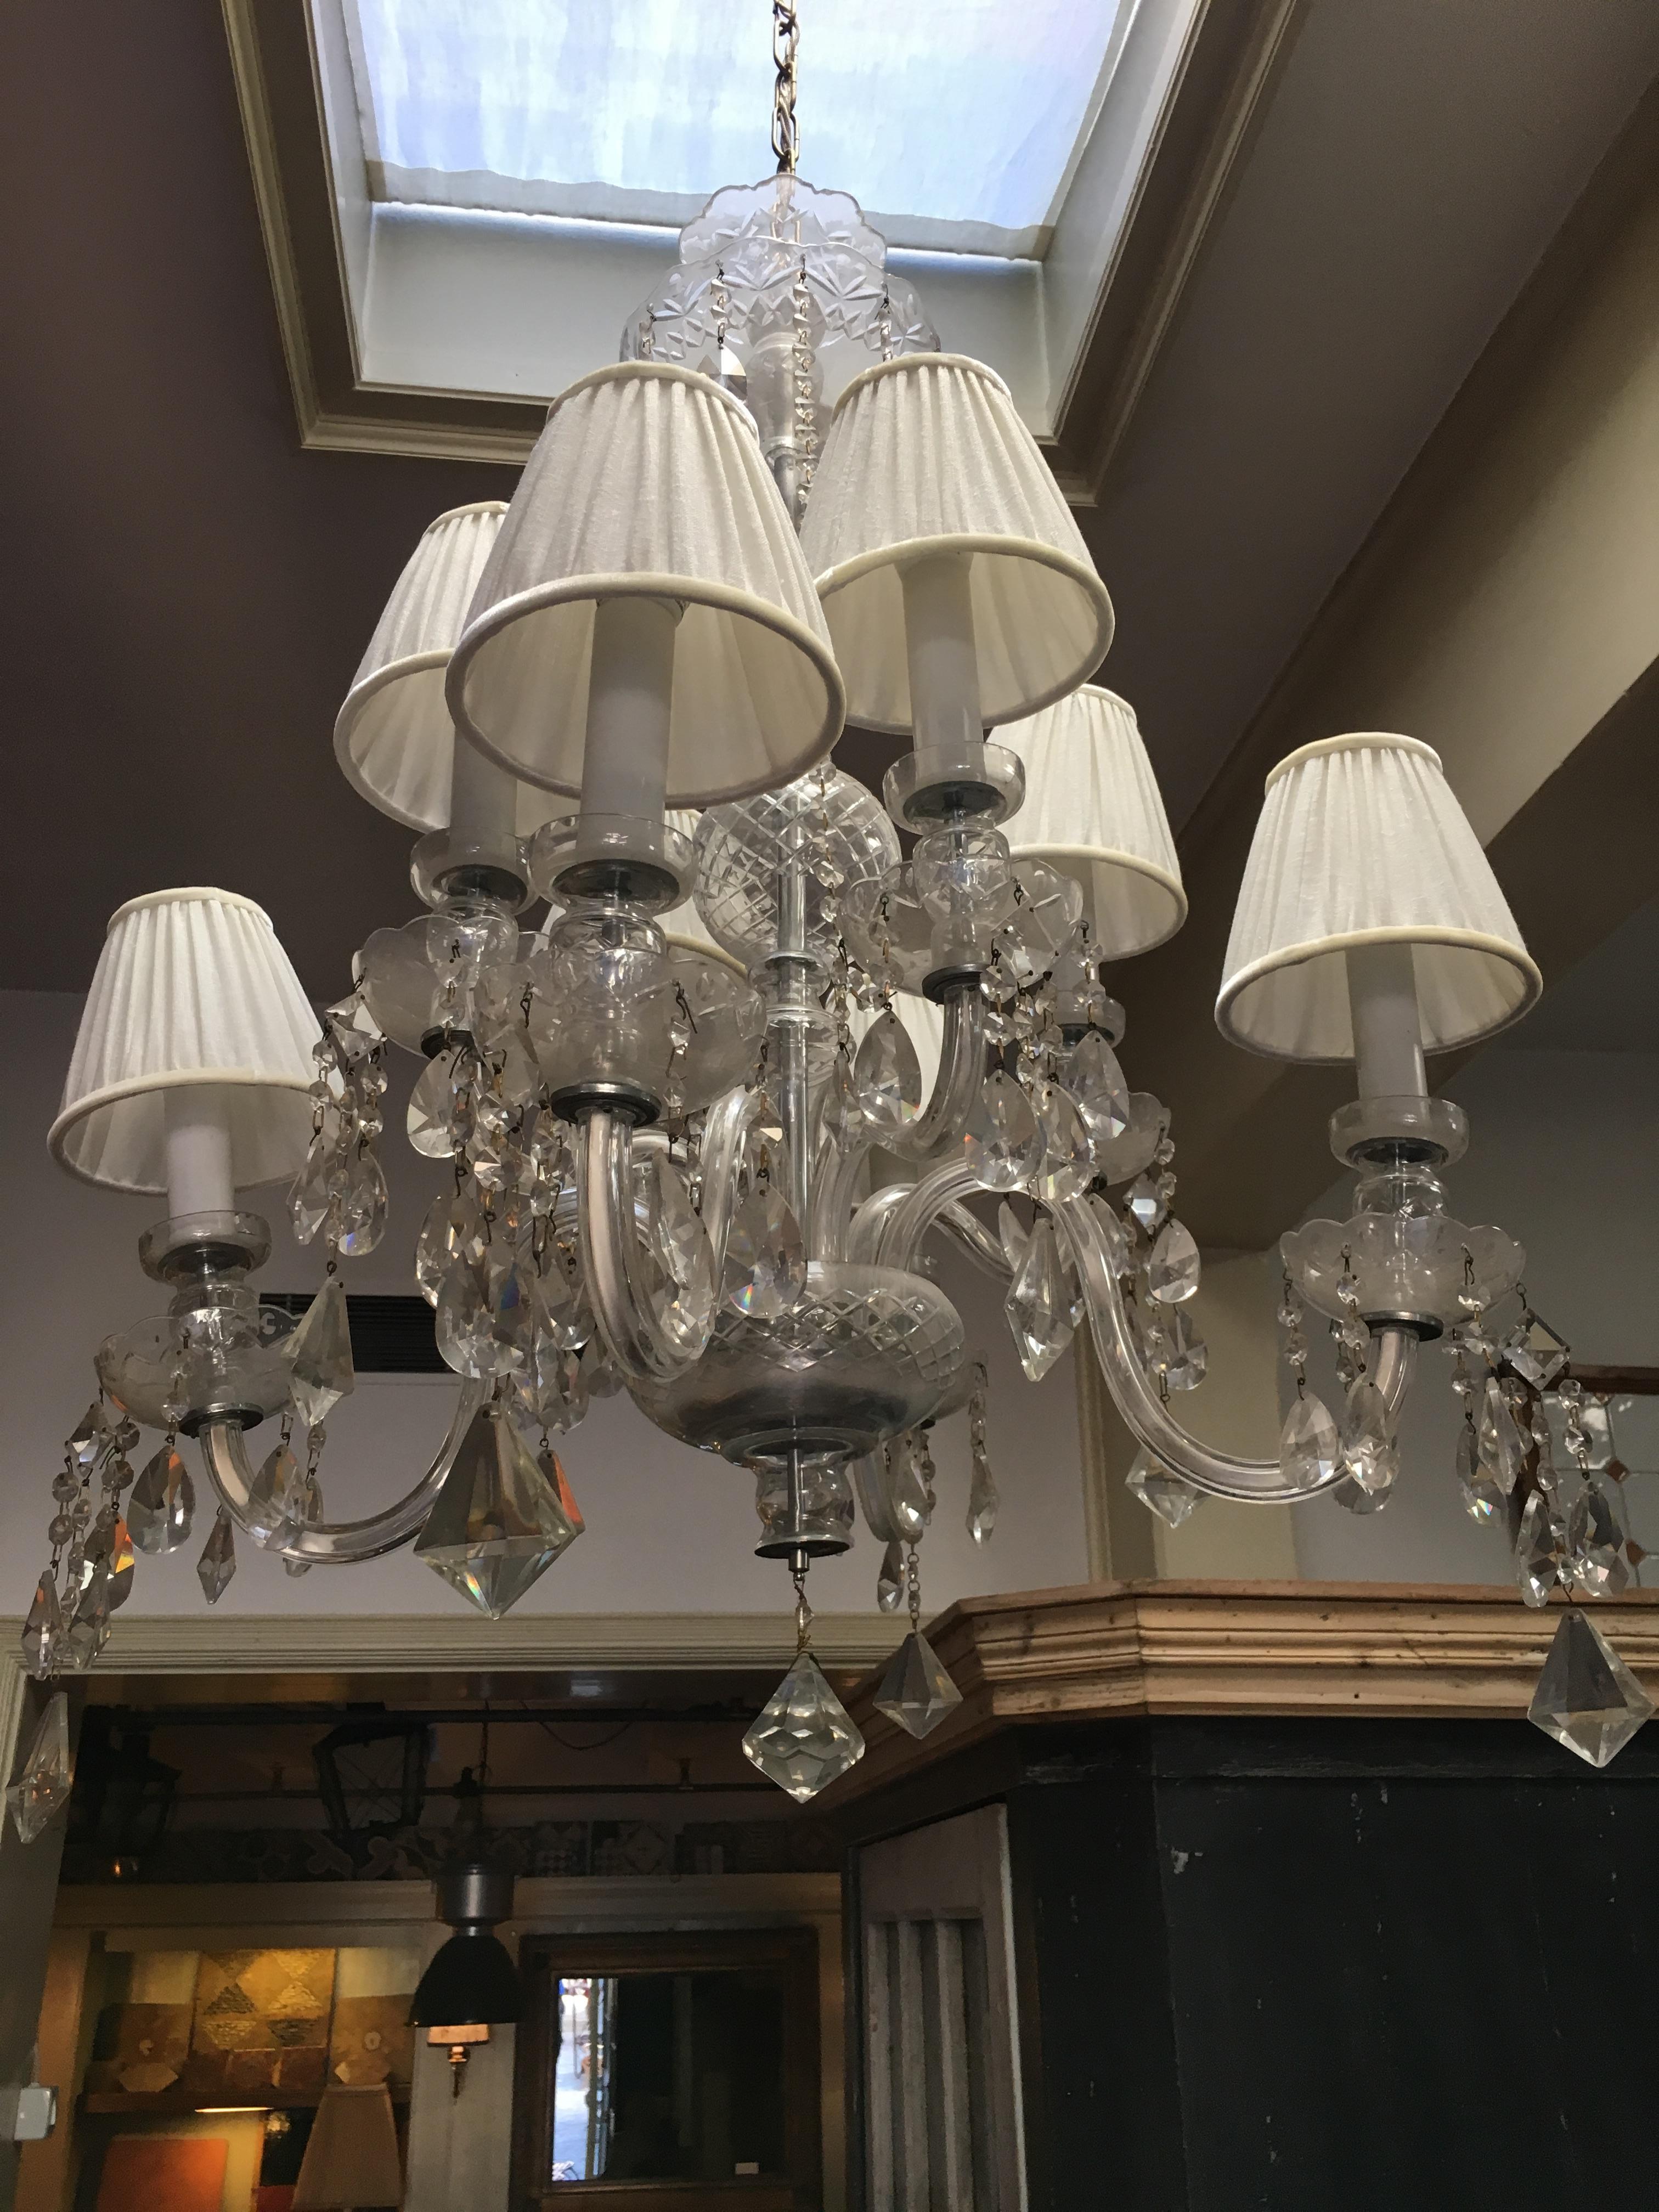 Midcentury Italian eight bulbs crystal chandelier from 1960s.
Lampshades are to be quoted separately.